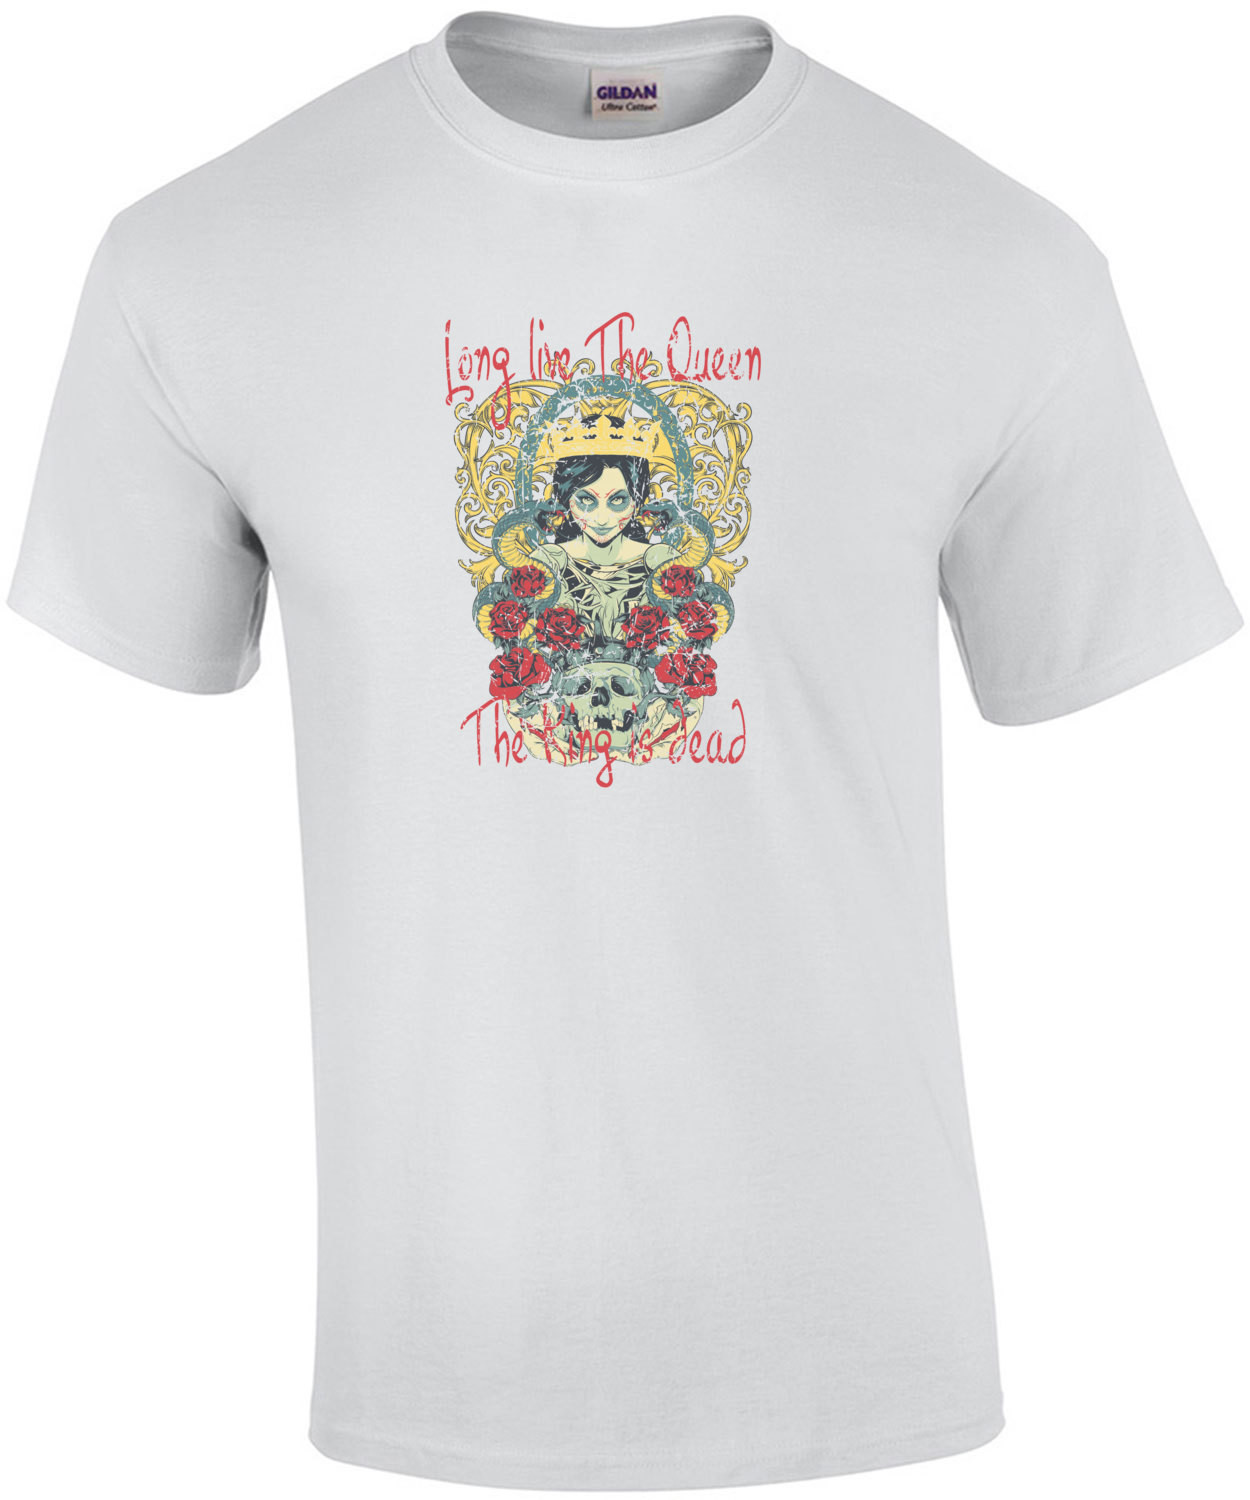 Long Live The Queen The King Is Dead Gothic T-Shirt